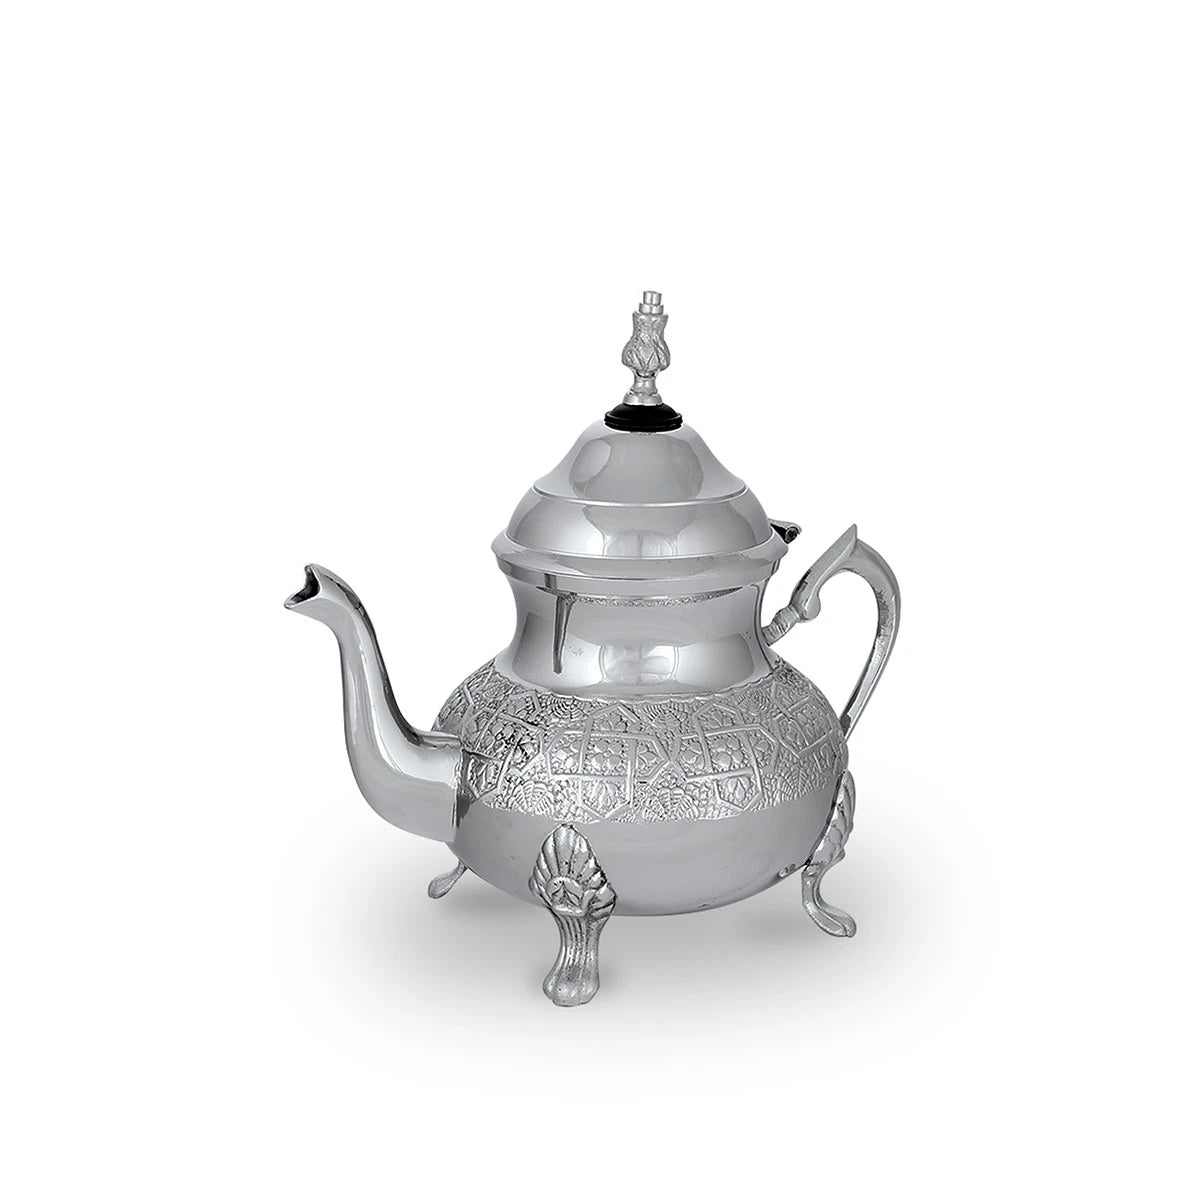 Handmade Moroccan Teapot Carved w/ Traditional Art Patterns, BRASS